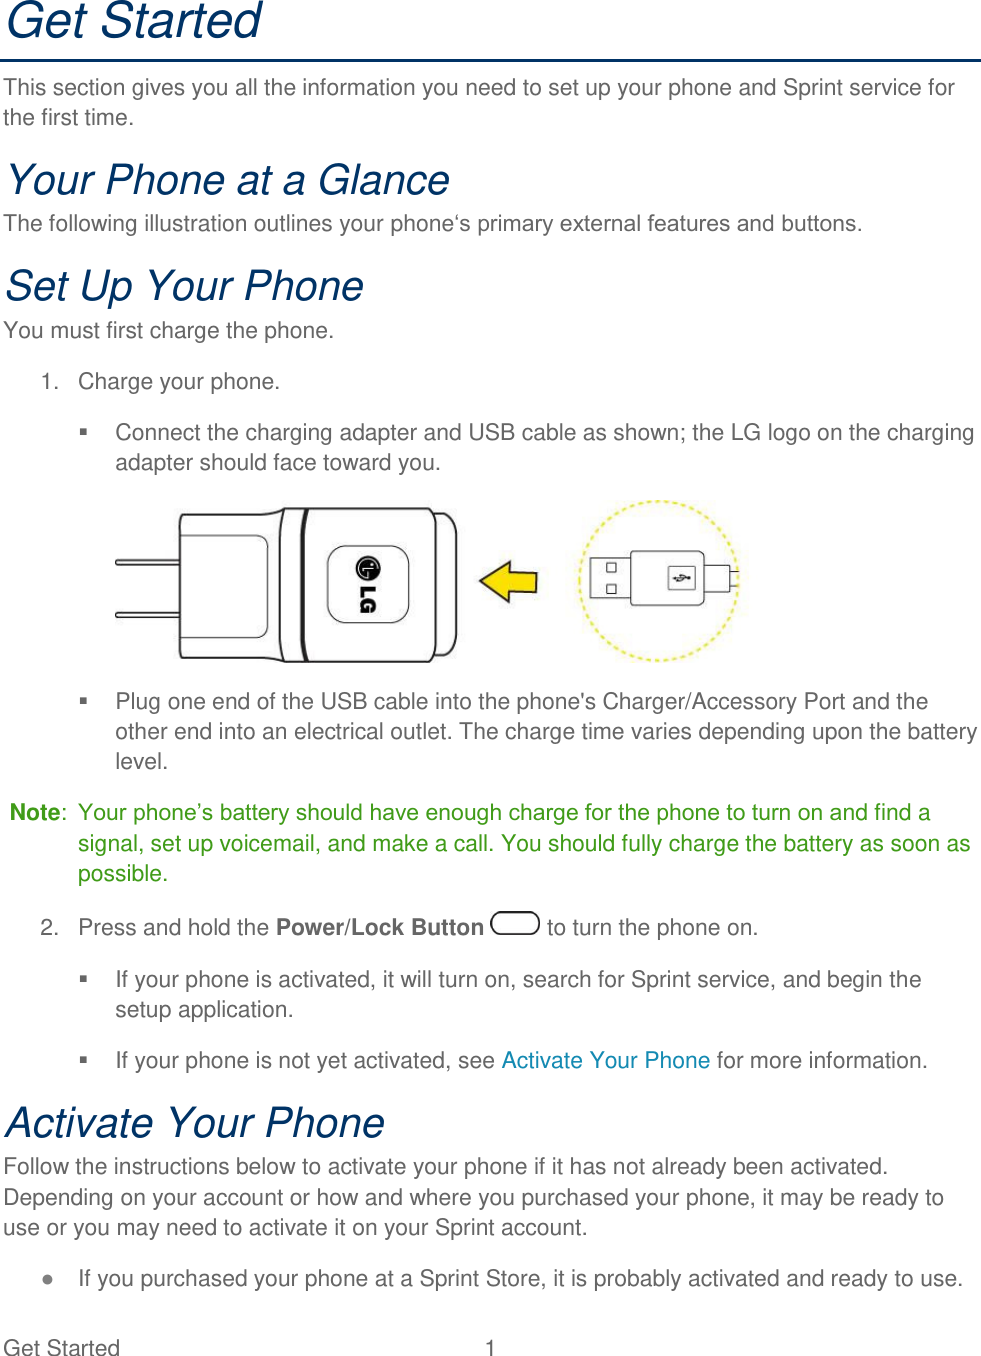  Get Started  1   Get Started This section gives you all the information you need to set up your phone and Sprint service for the first time. Your Phone at a Glance The following illustration outlines your phone‗s primary external features and buttons. Set Up Your Phone You must first charge the phone. 1.  Charge your phone.   Connect the charging adapter and USB cable as shown; the LG logo on the charging adapter should face toward you.     Plug one end of the USB cable into the phone&apos;s Charger/Accessory Port and the other end into an electrical outlet. The charge time varies depending upon the battery level.   Note:  Your phone‘s battery should have enough charge for the phone to turn on and find a signal, set up voicemail, and make a call. You should fully charge the battery as soon as possible.  2.  Press and hold the Power/Lock Button   to turn the phone on.   If your phone is activated, it will turn on, search for Sprint service, and begin the setup application.    If your phone is not yet activated, see Activate Your Phone for more information. Activate Your Phone Follow the instructions below to activate your phone if it has not already been activated. Depending on your account or how and where you purchased your phone, it may be ready to use or you may need to activate it on your Sprint account.  ● If you purchased your phone at a Sprint Store, it is probably activated and ready to use.  